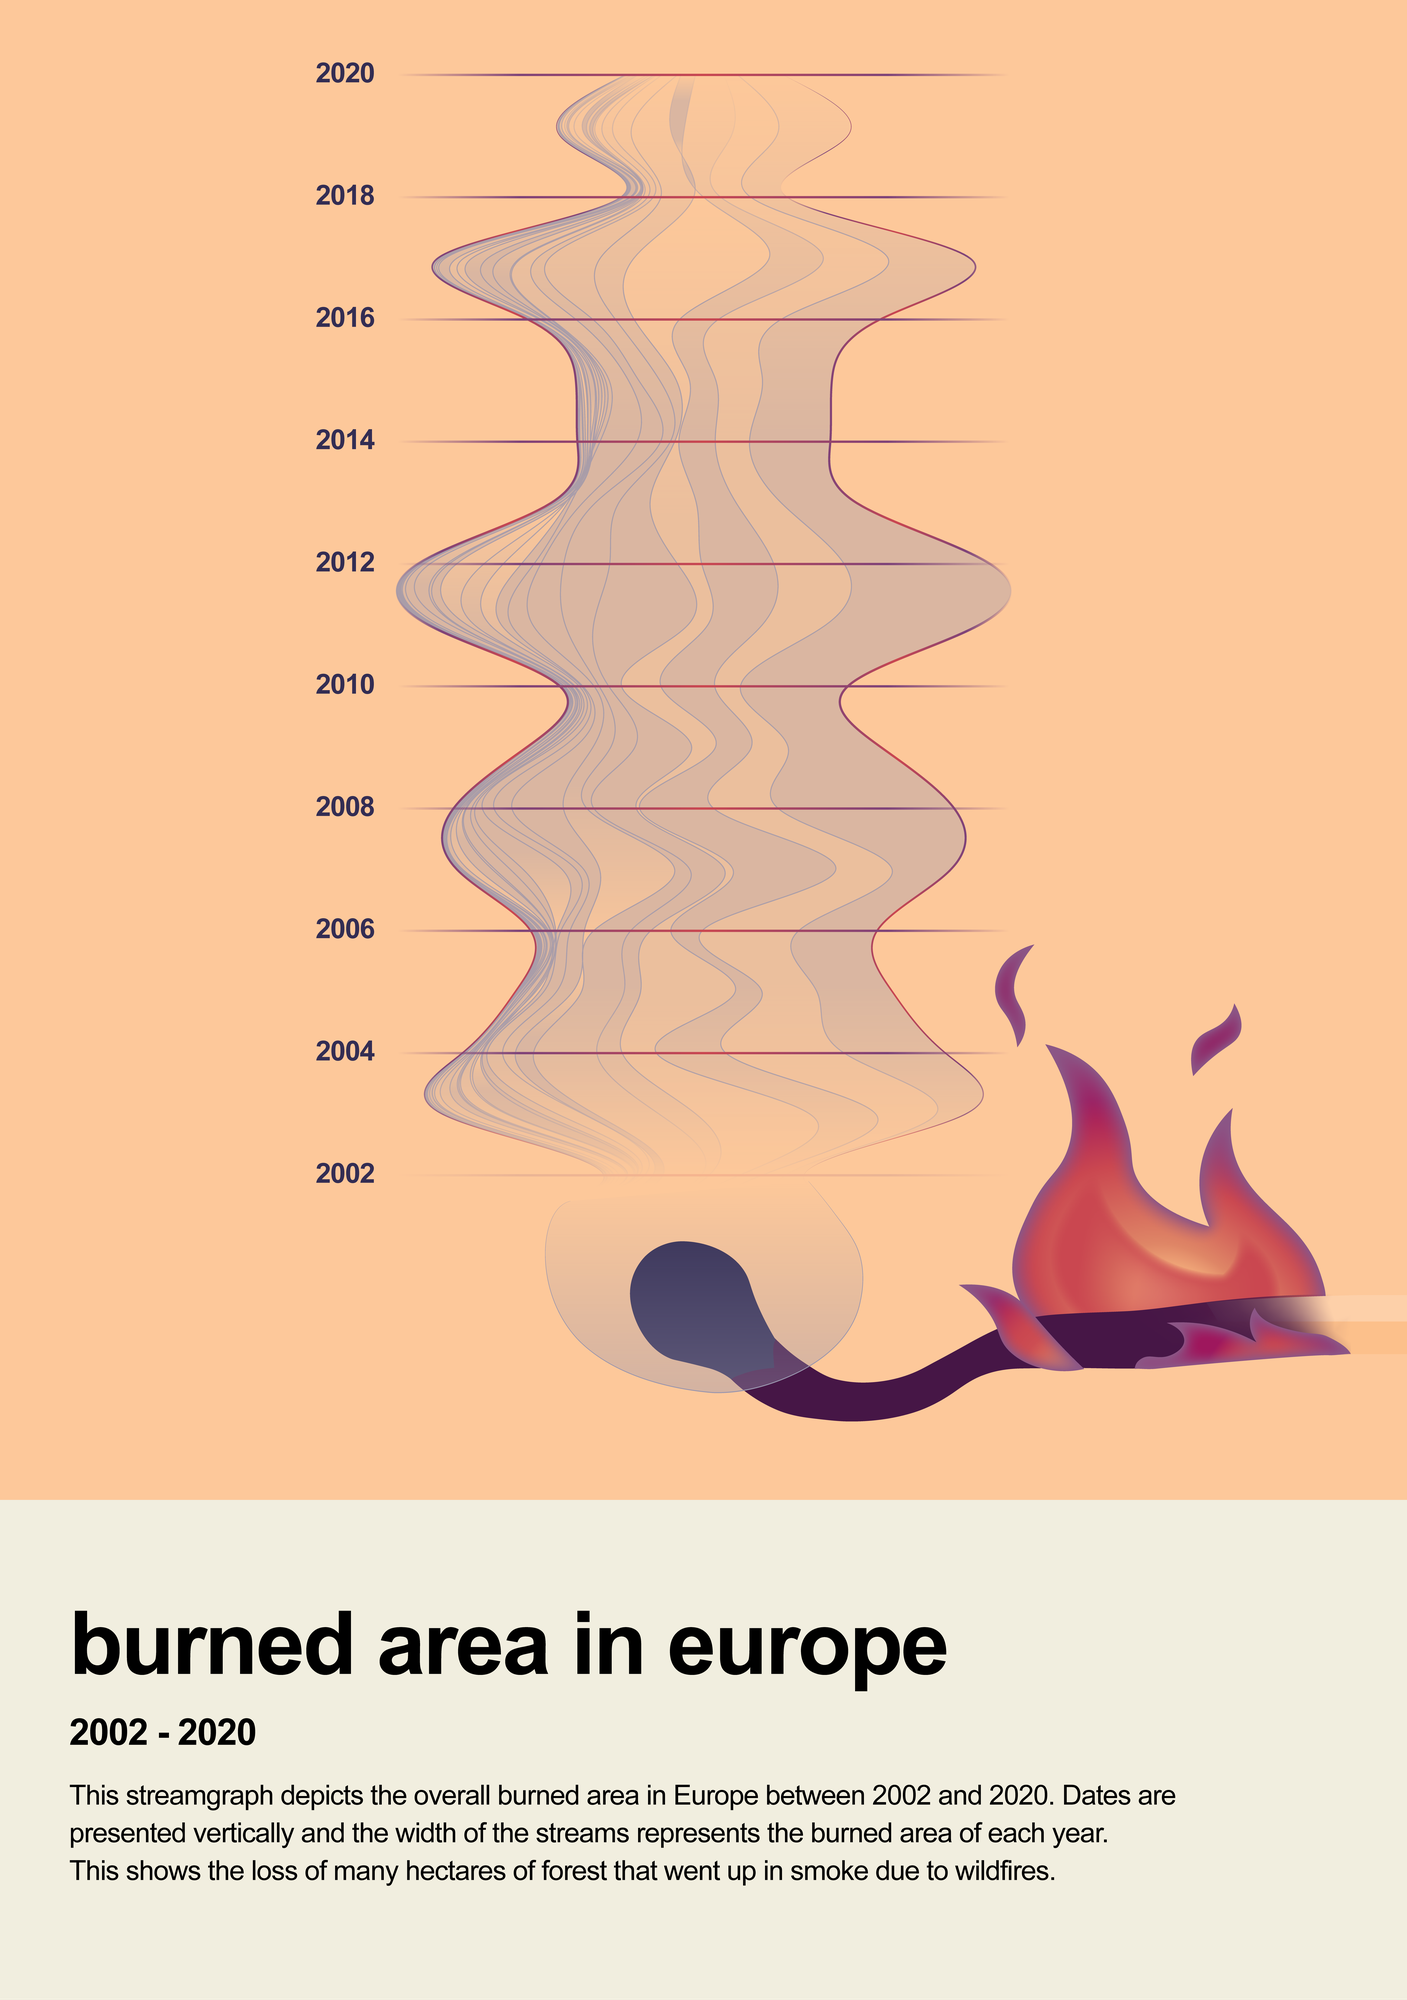 Burned Area in Europe - a Little Picture by Anne-Lise Paris